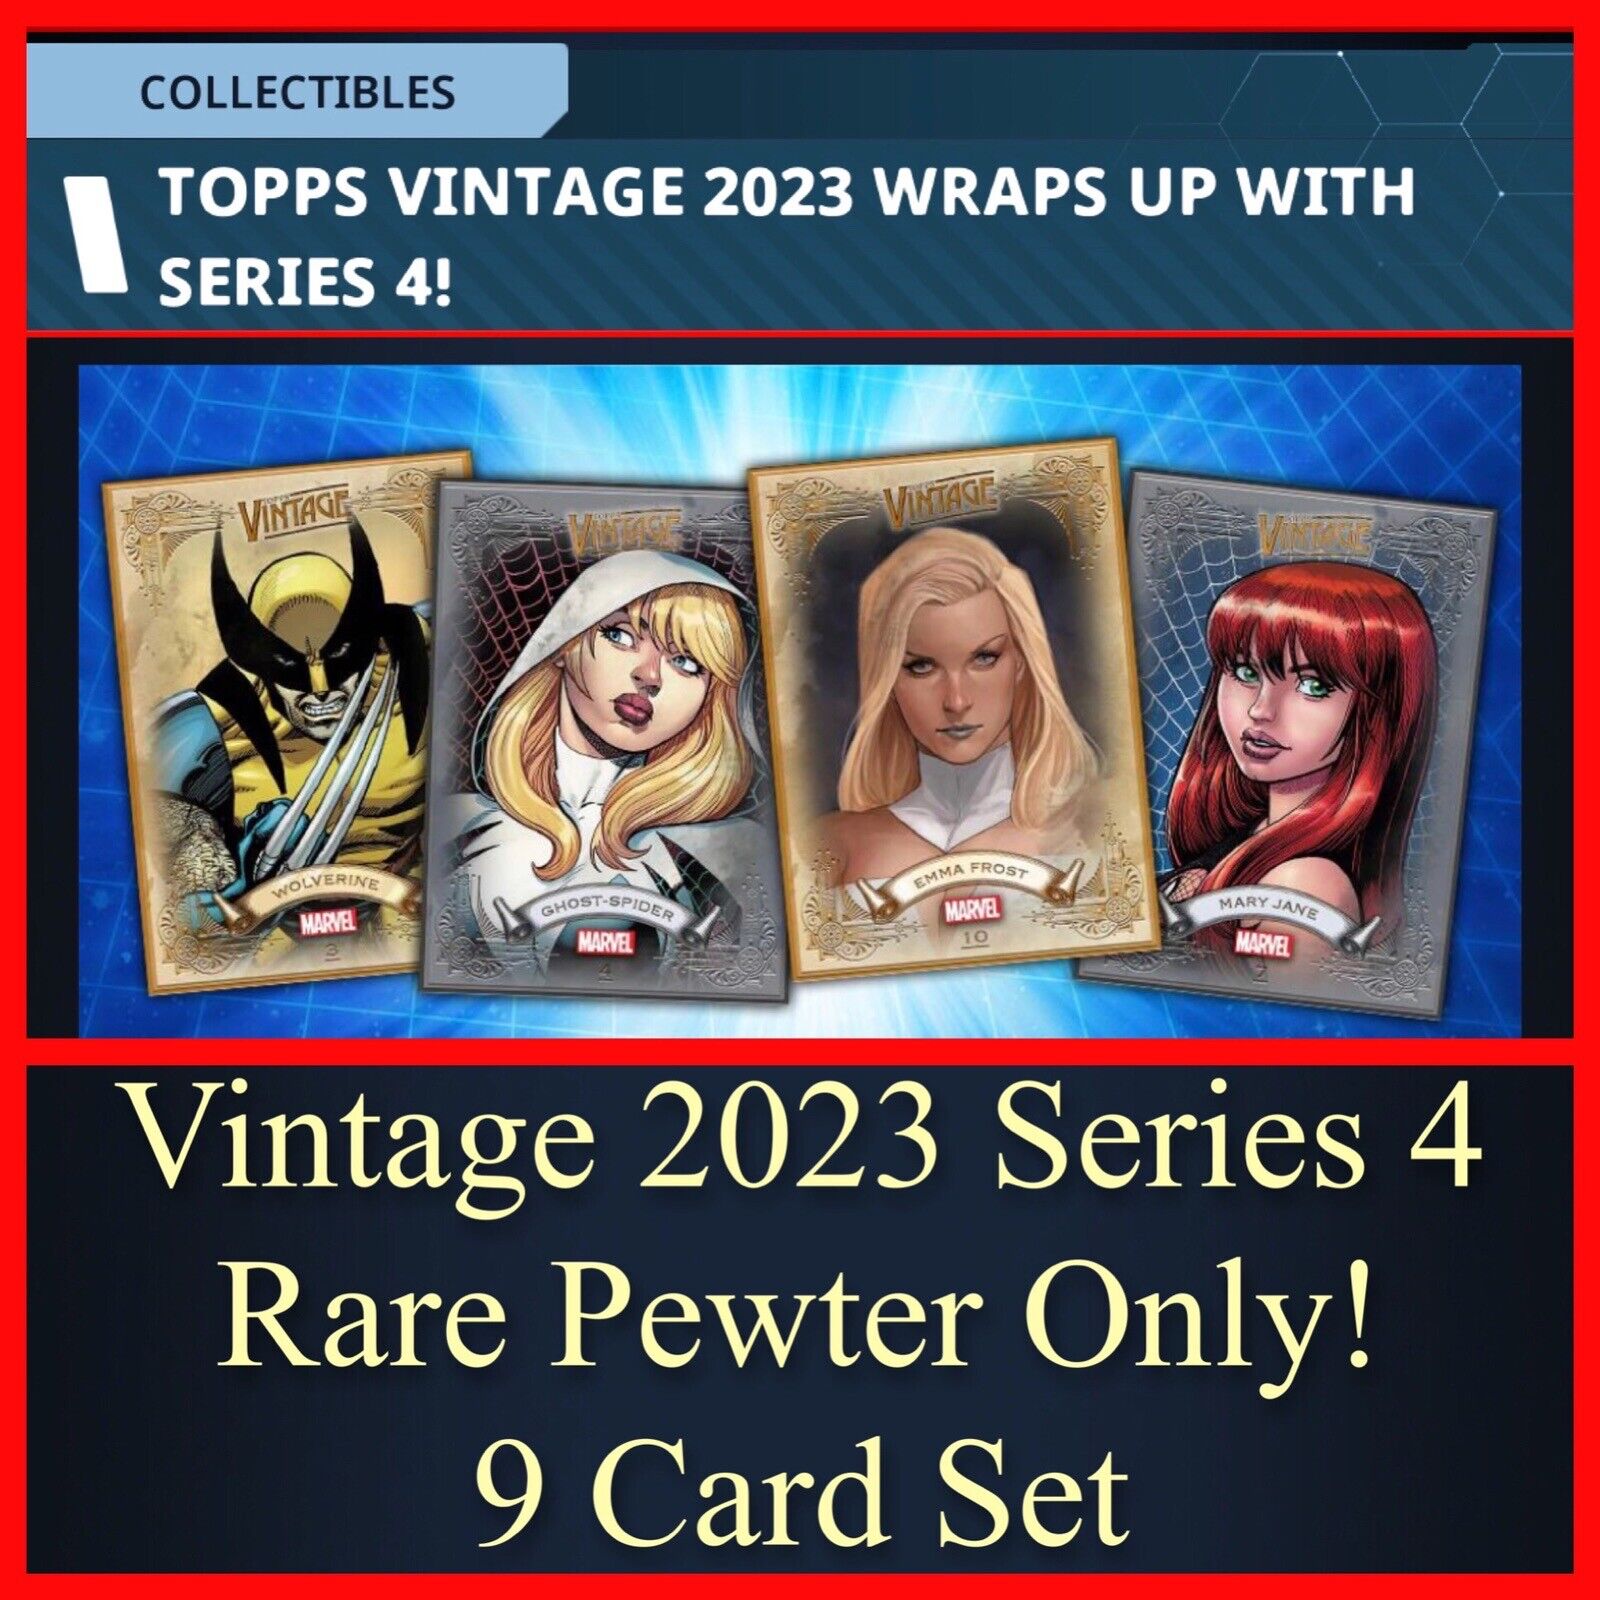 VINTAGE 2023 SERIES 4-RARE PEWTER ONLY 9 CARD SET-TOPPS MARVEL COLLECT